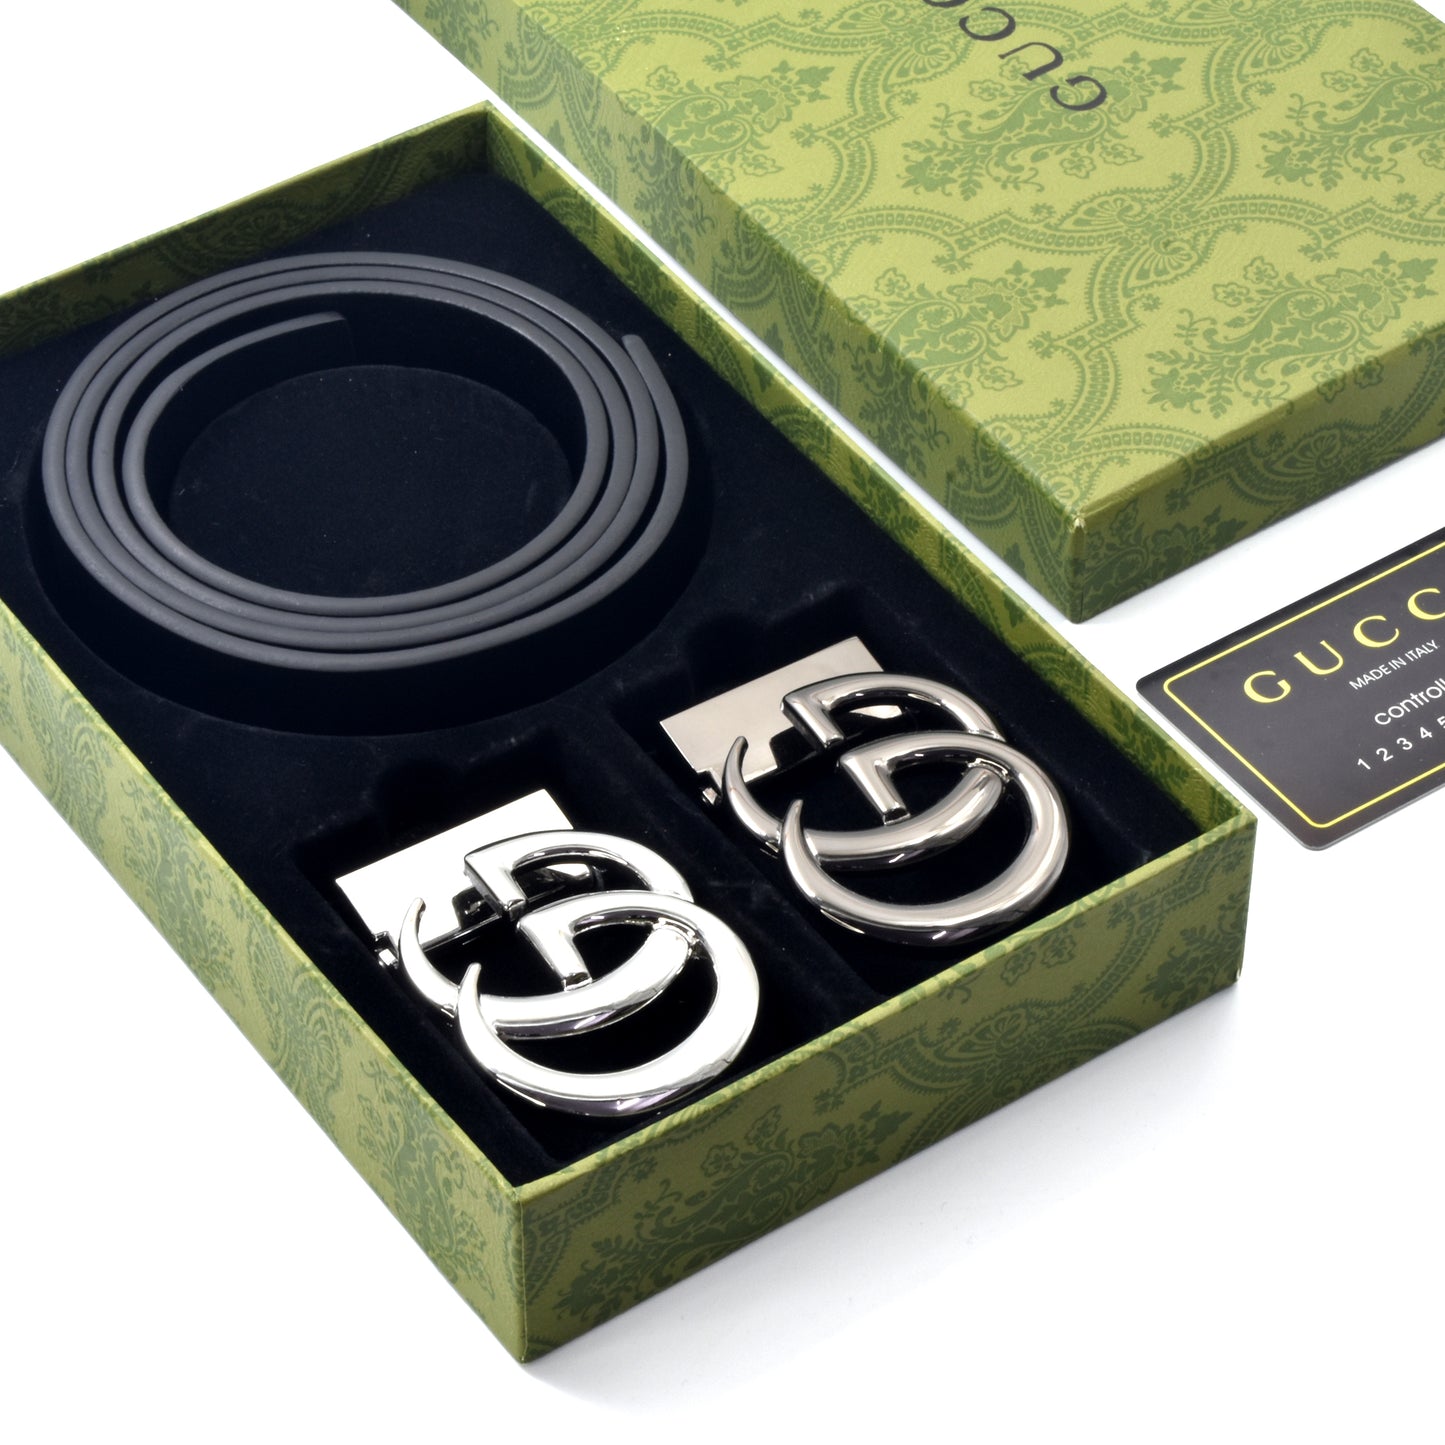 Two Manual Buckles Belt Set | Imported from China | GC Belt 1025